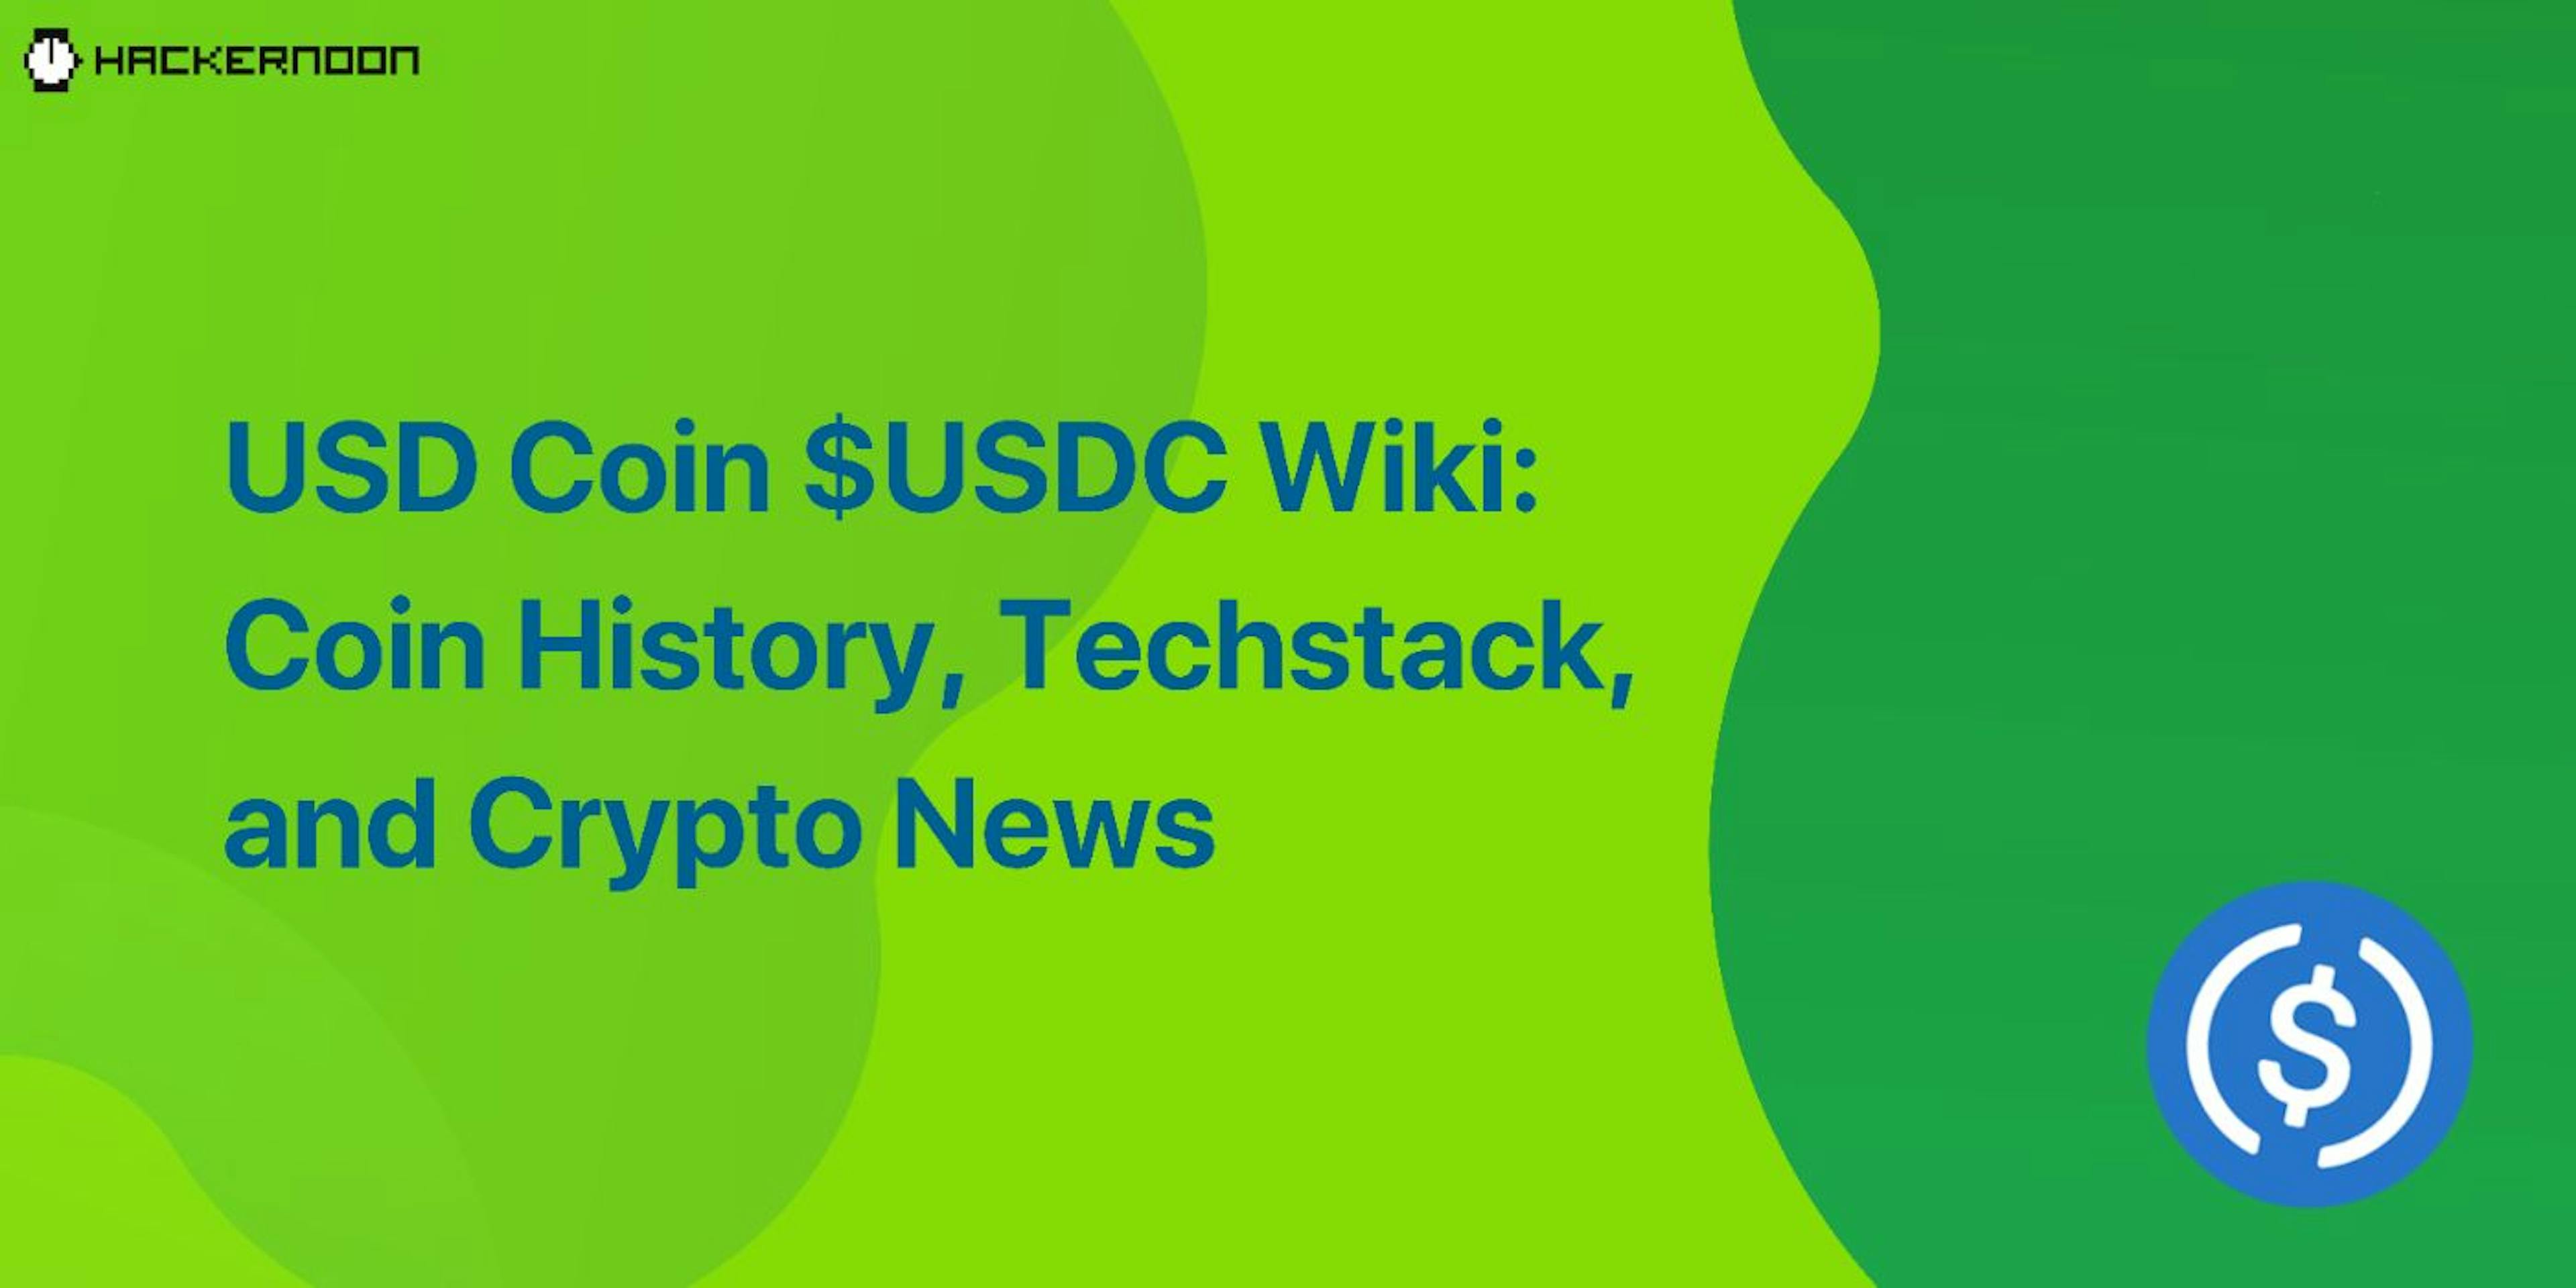 /usd-coin-$usdc-wiki-coin-history-techstack-and-crypto-news feature image